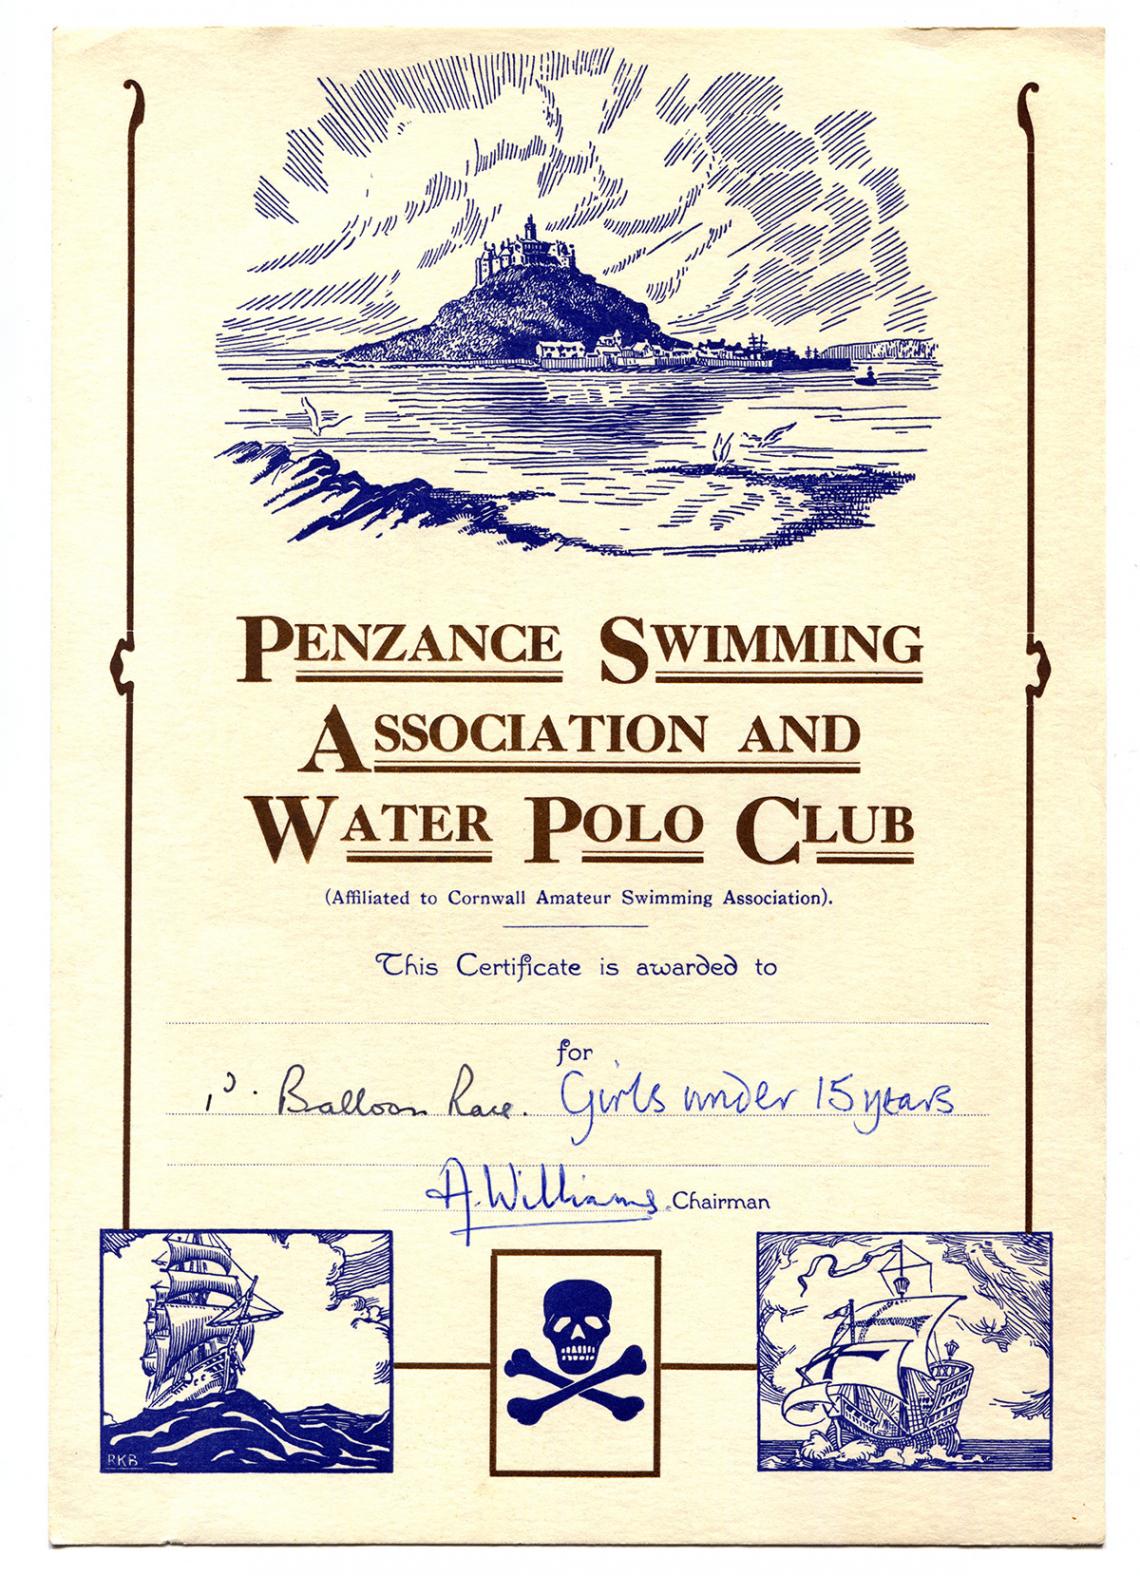 Penzance swimming association and water polo club certificate